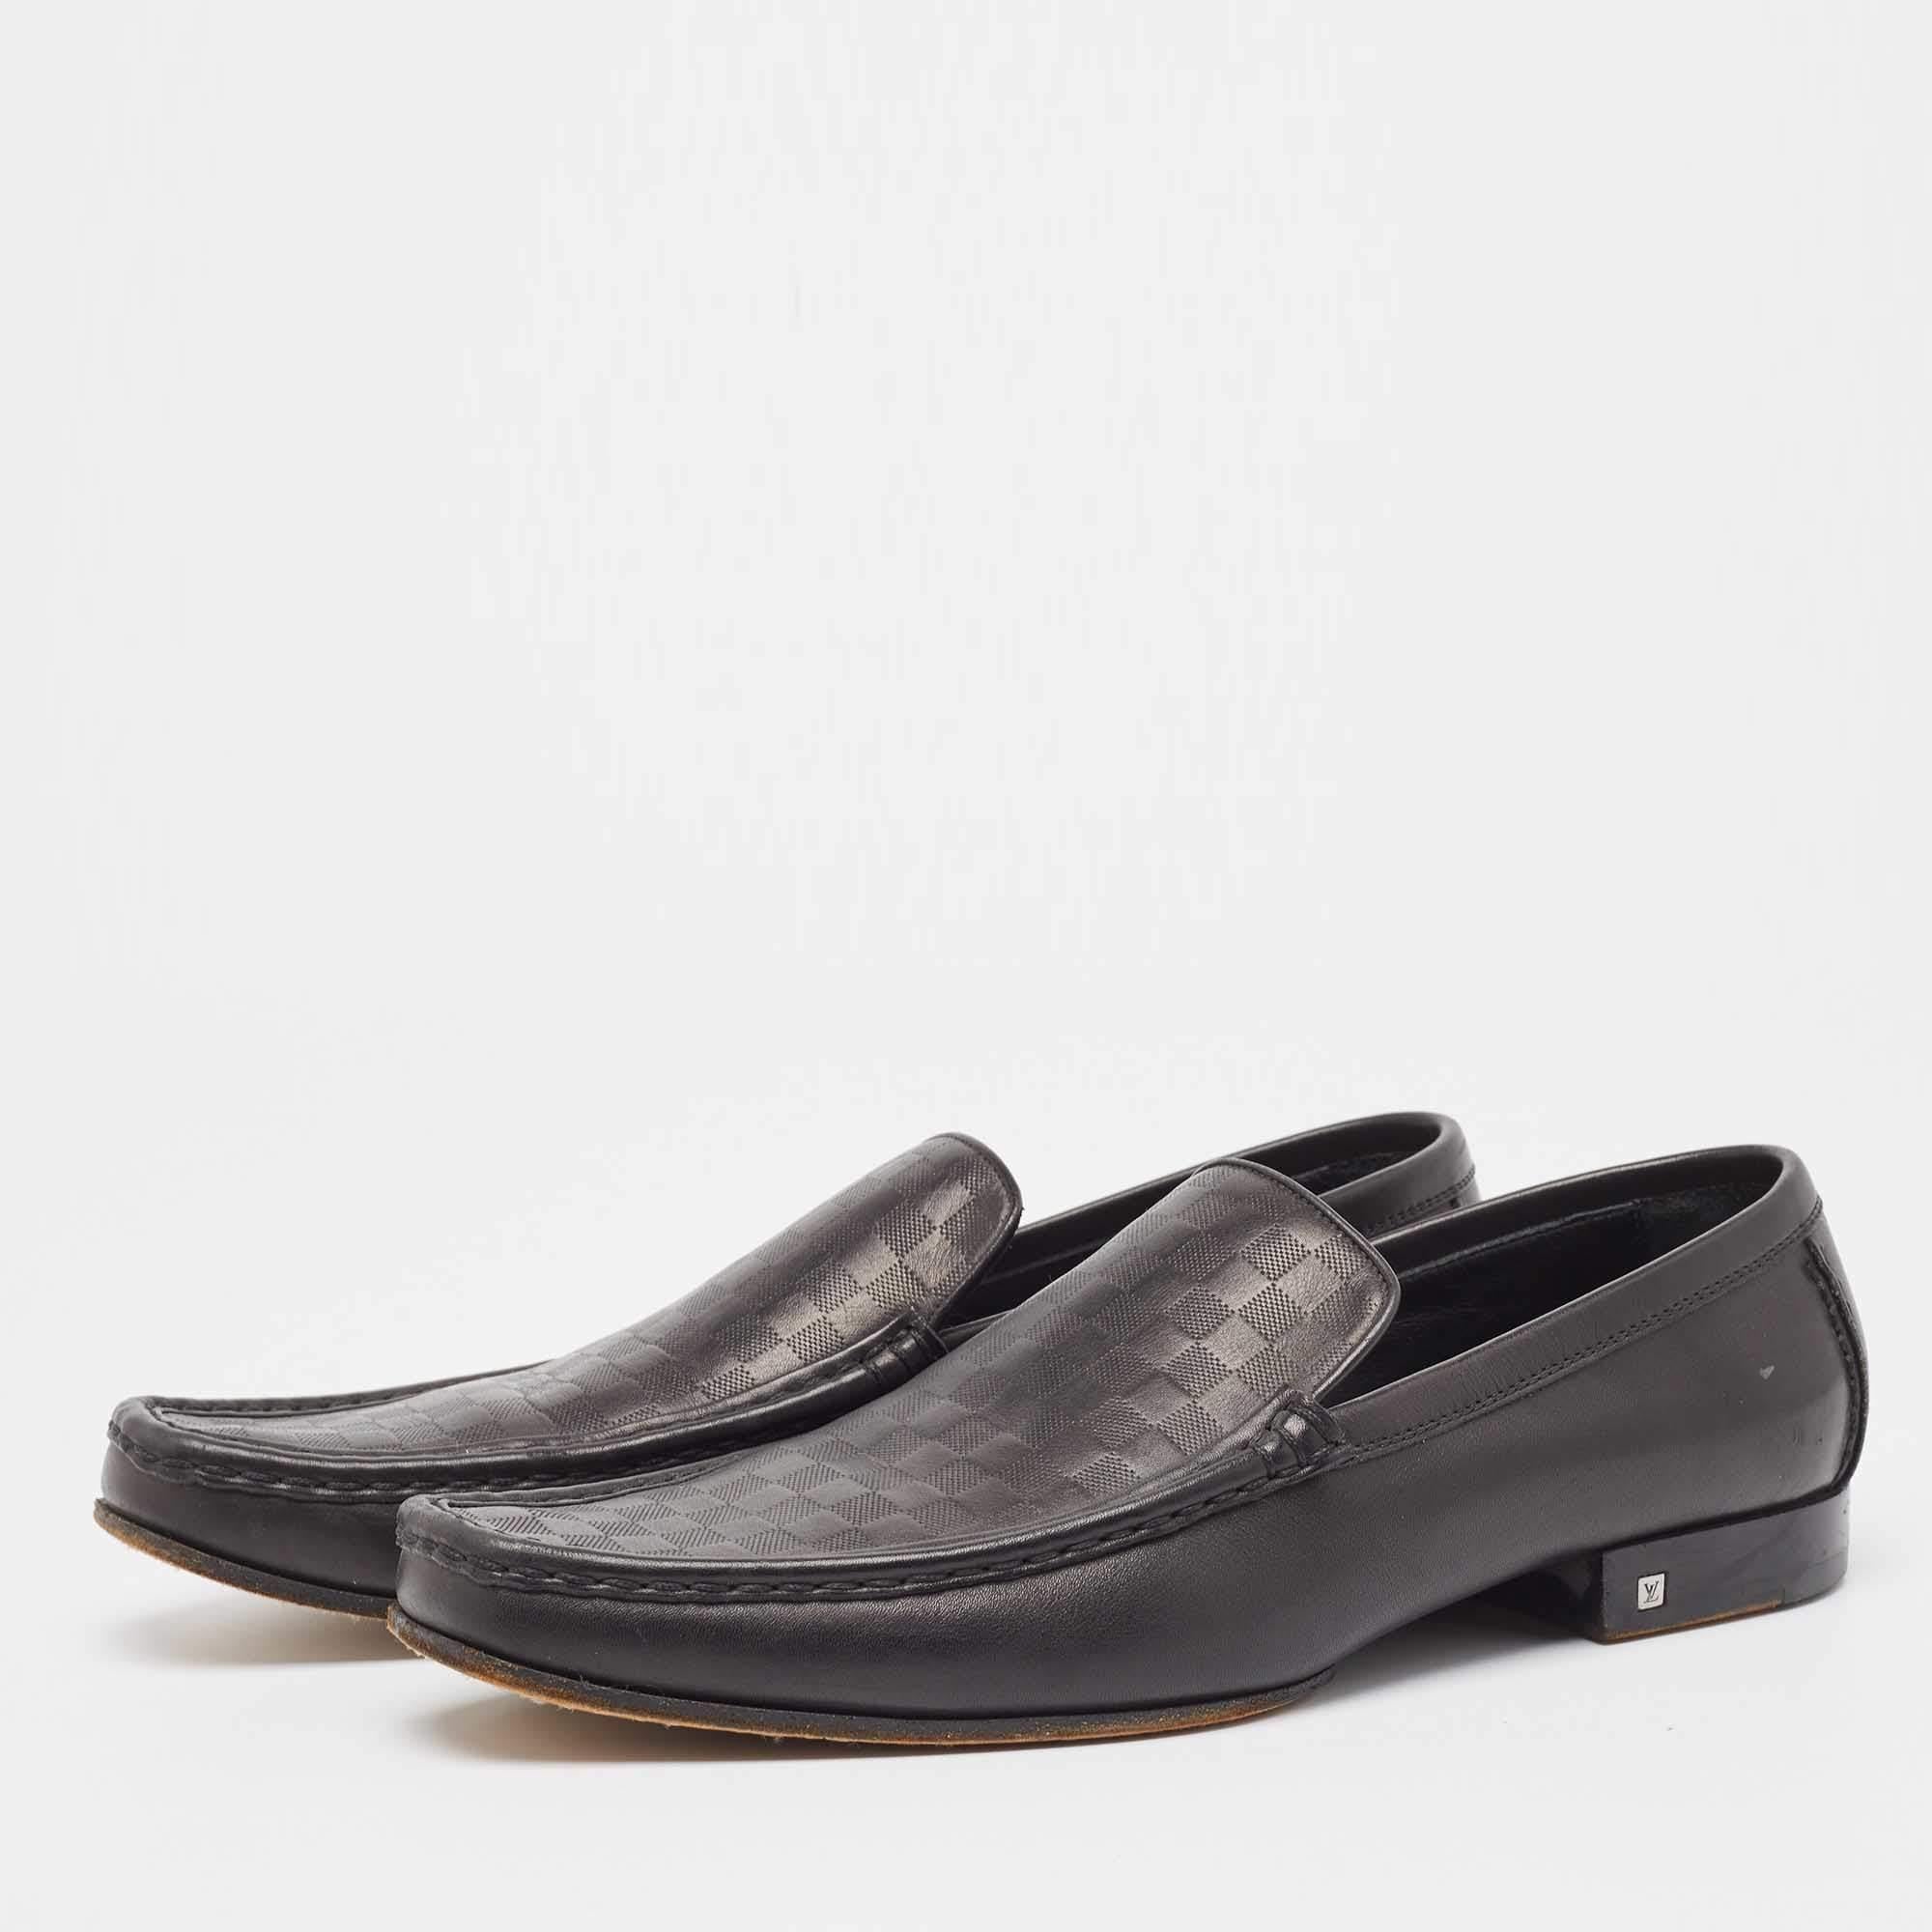 Practical, fashionable, and durable—these designer loafers are carefully built to be fine companions to your everyday style. They come made using the best materials to be a prized buy.

Includes: Original Dustbag